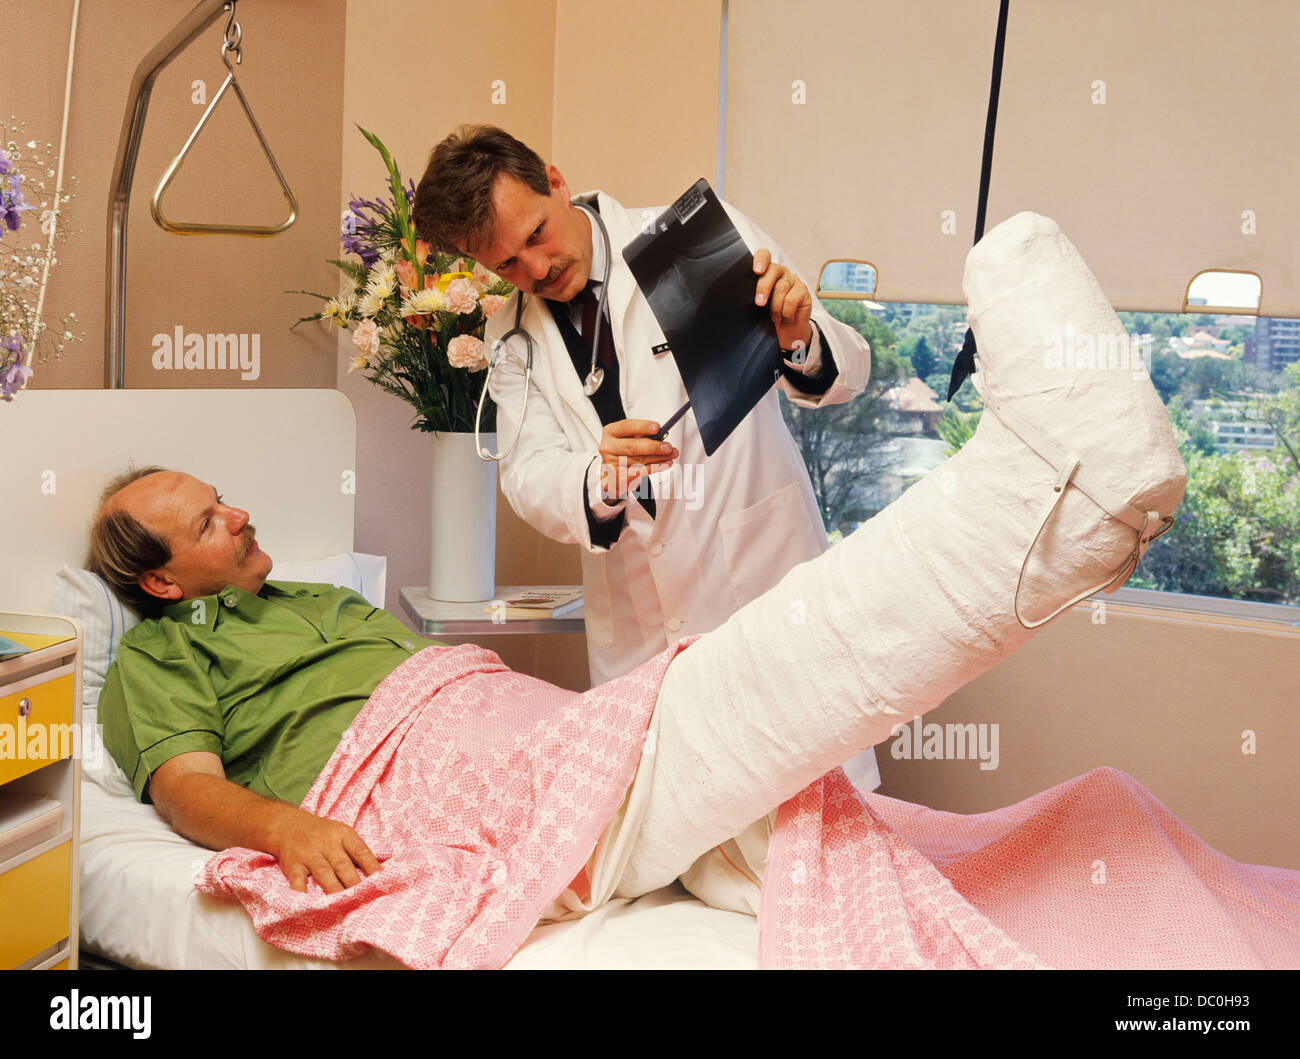 1980s 1990s MAN HOSPITAL BED BROKEN LEG IN CAST AND TRACTION GOING OVER X-RAY WITH DOCTOR Stock Photo